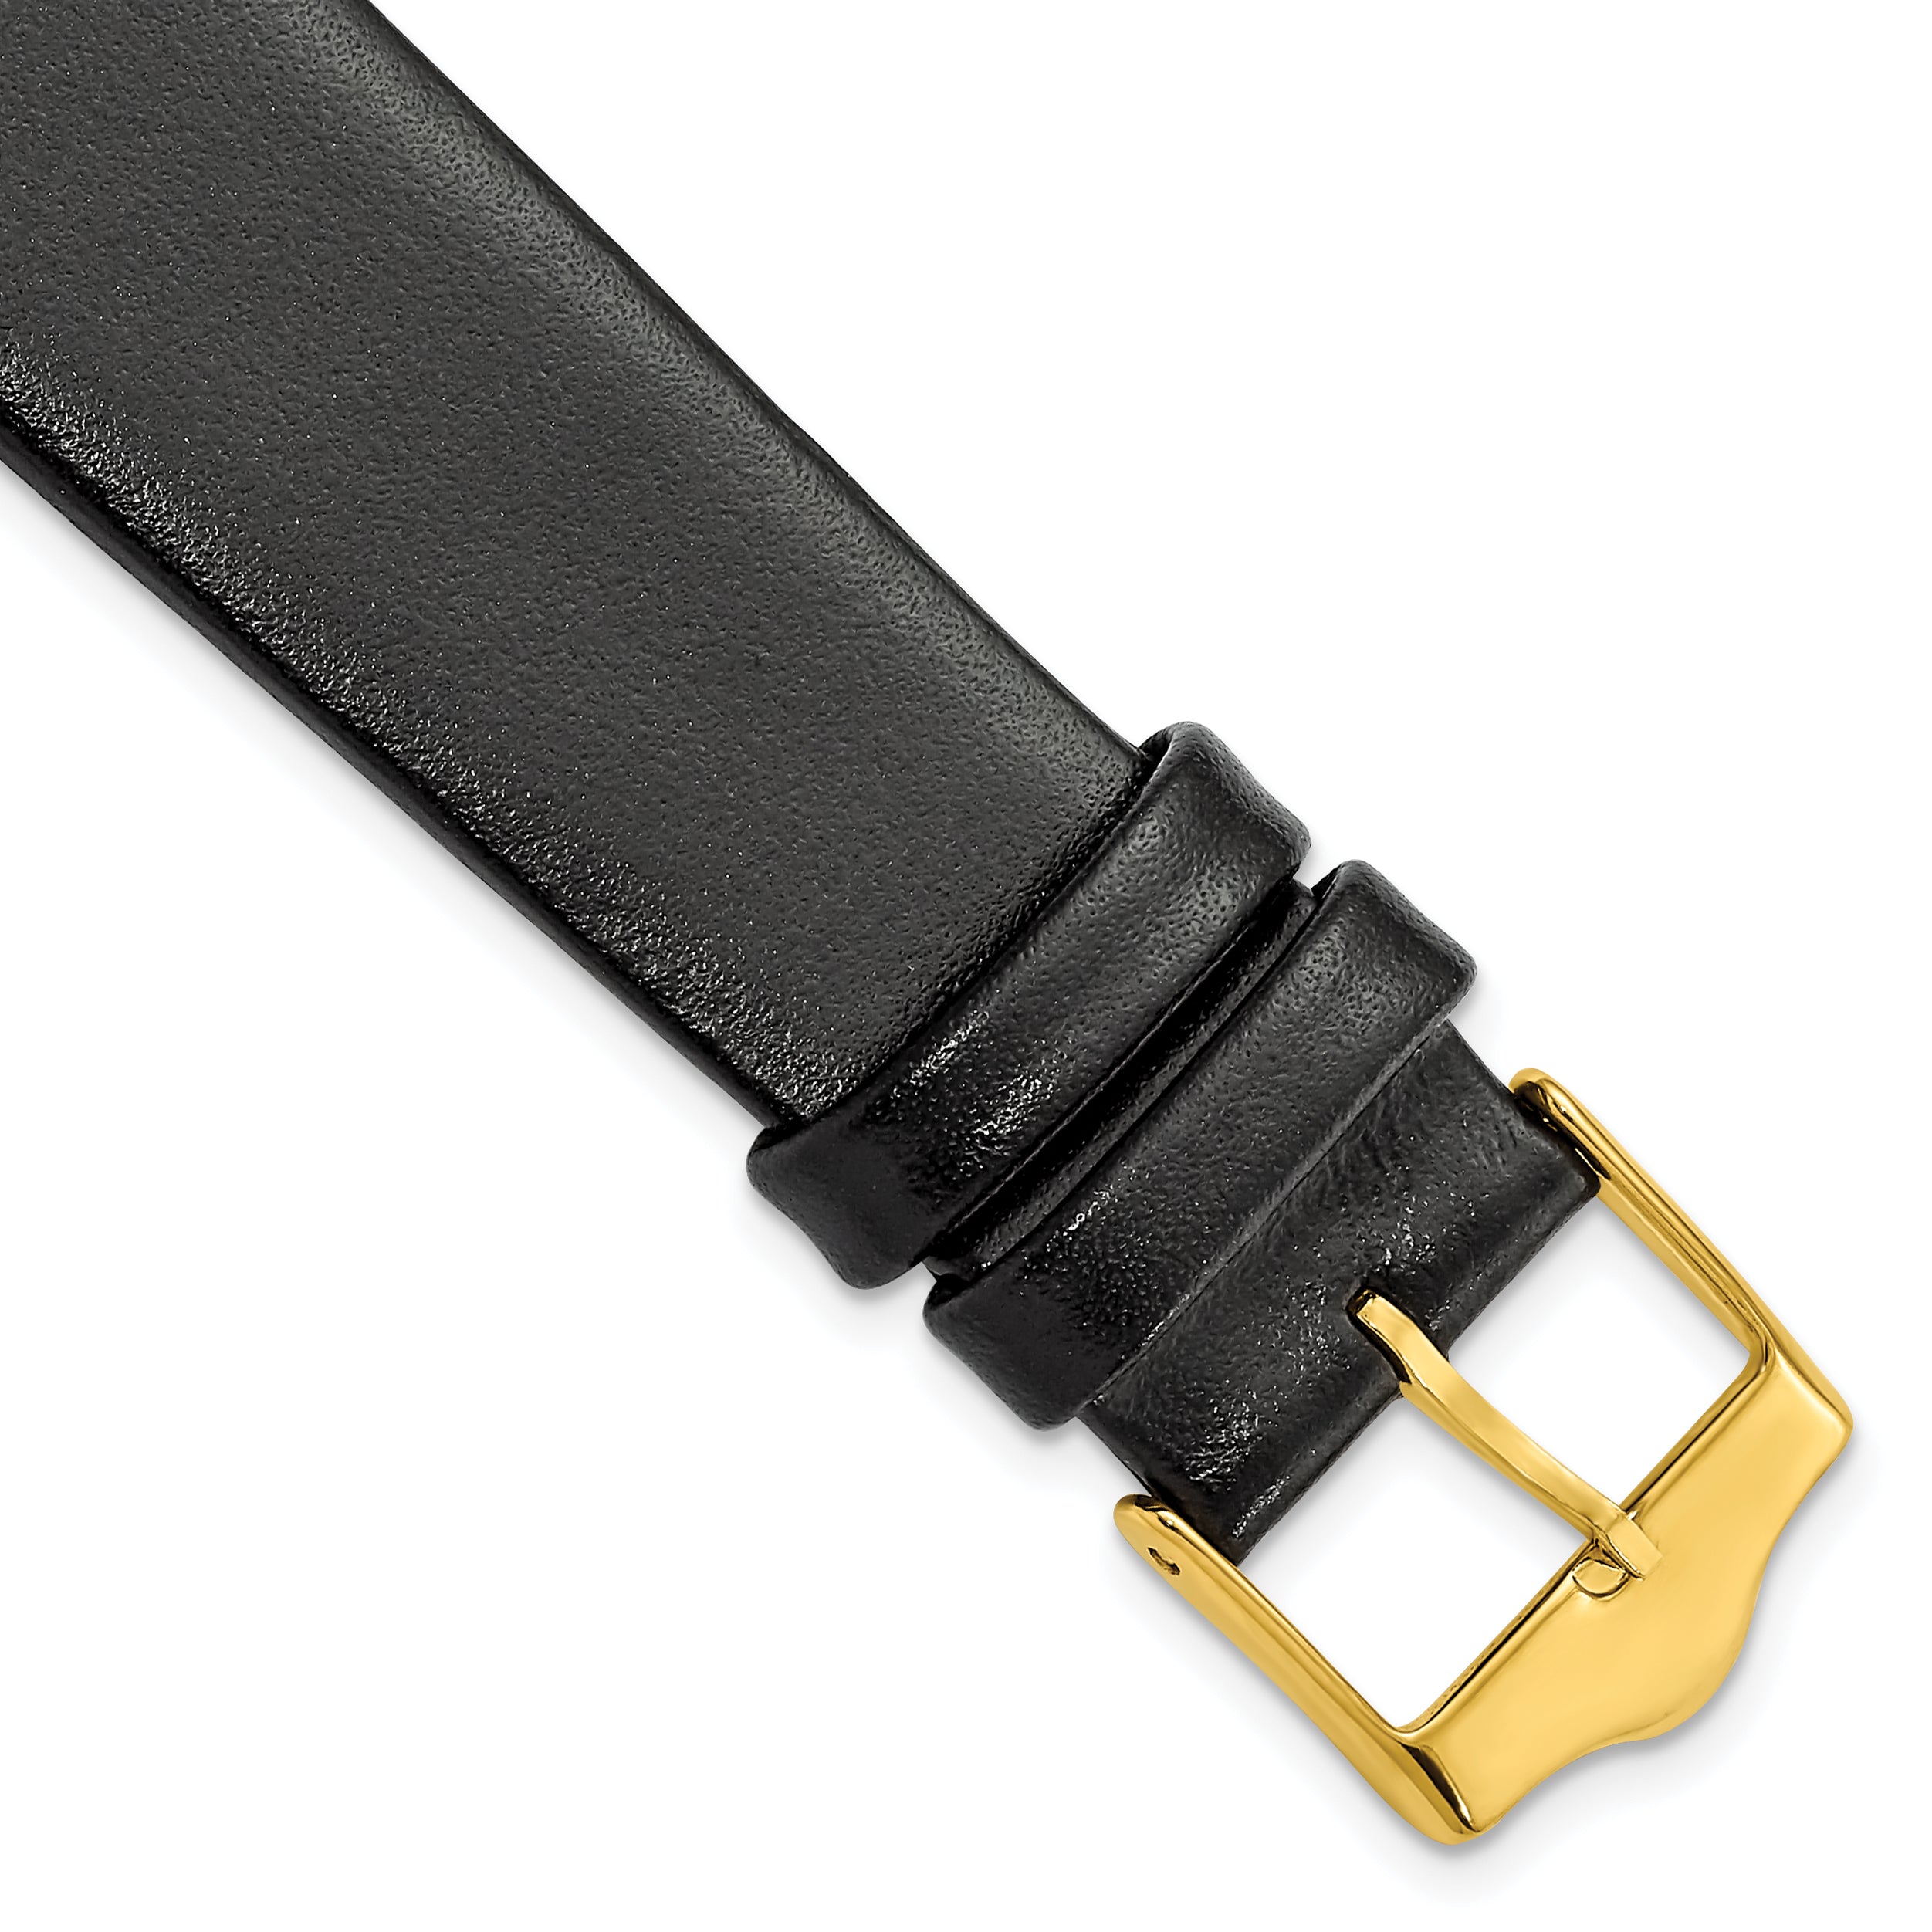 DeBeer 19mm Black Smooth Flat Leather with Gold-tone Buckle 7.5 inch Watch Band